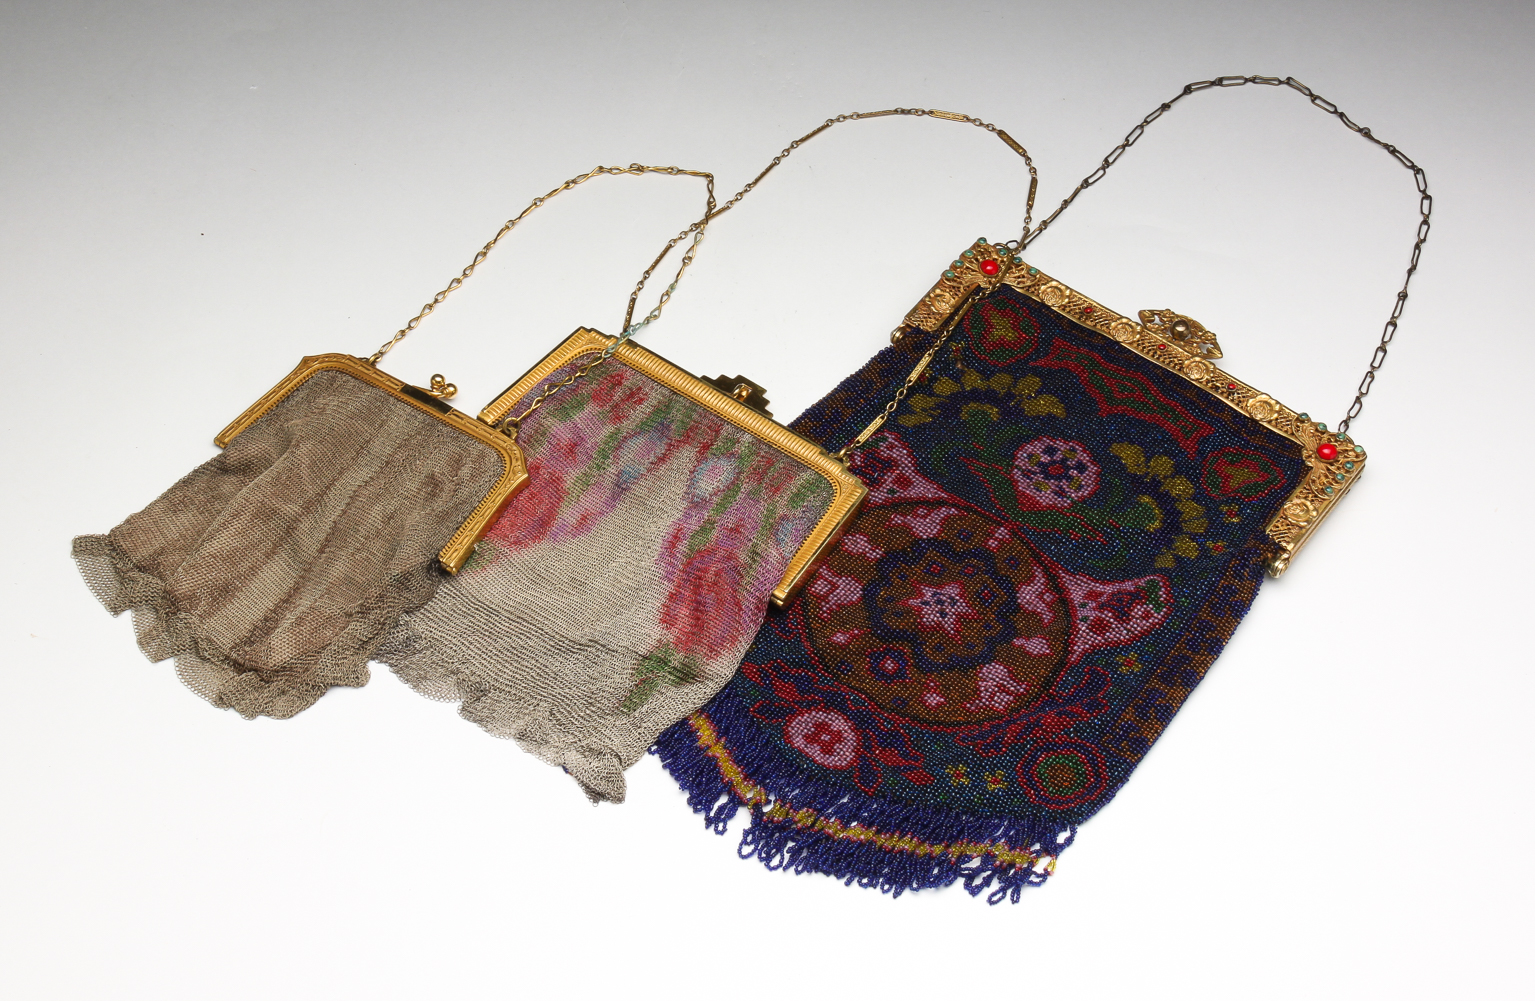 THREE VINTAGE EVENING BAGS. Early